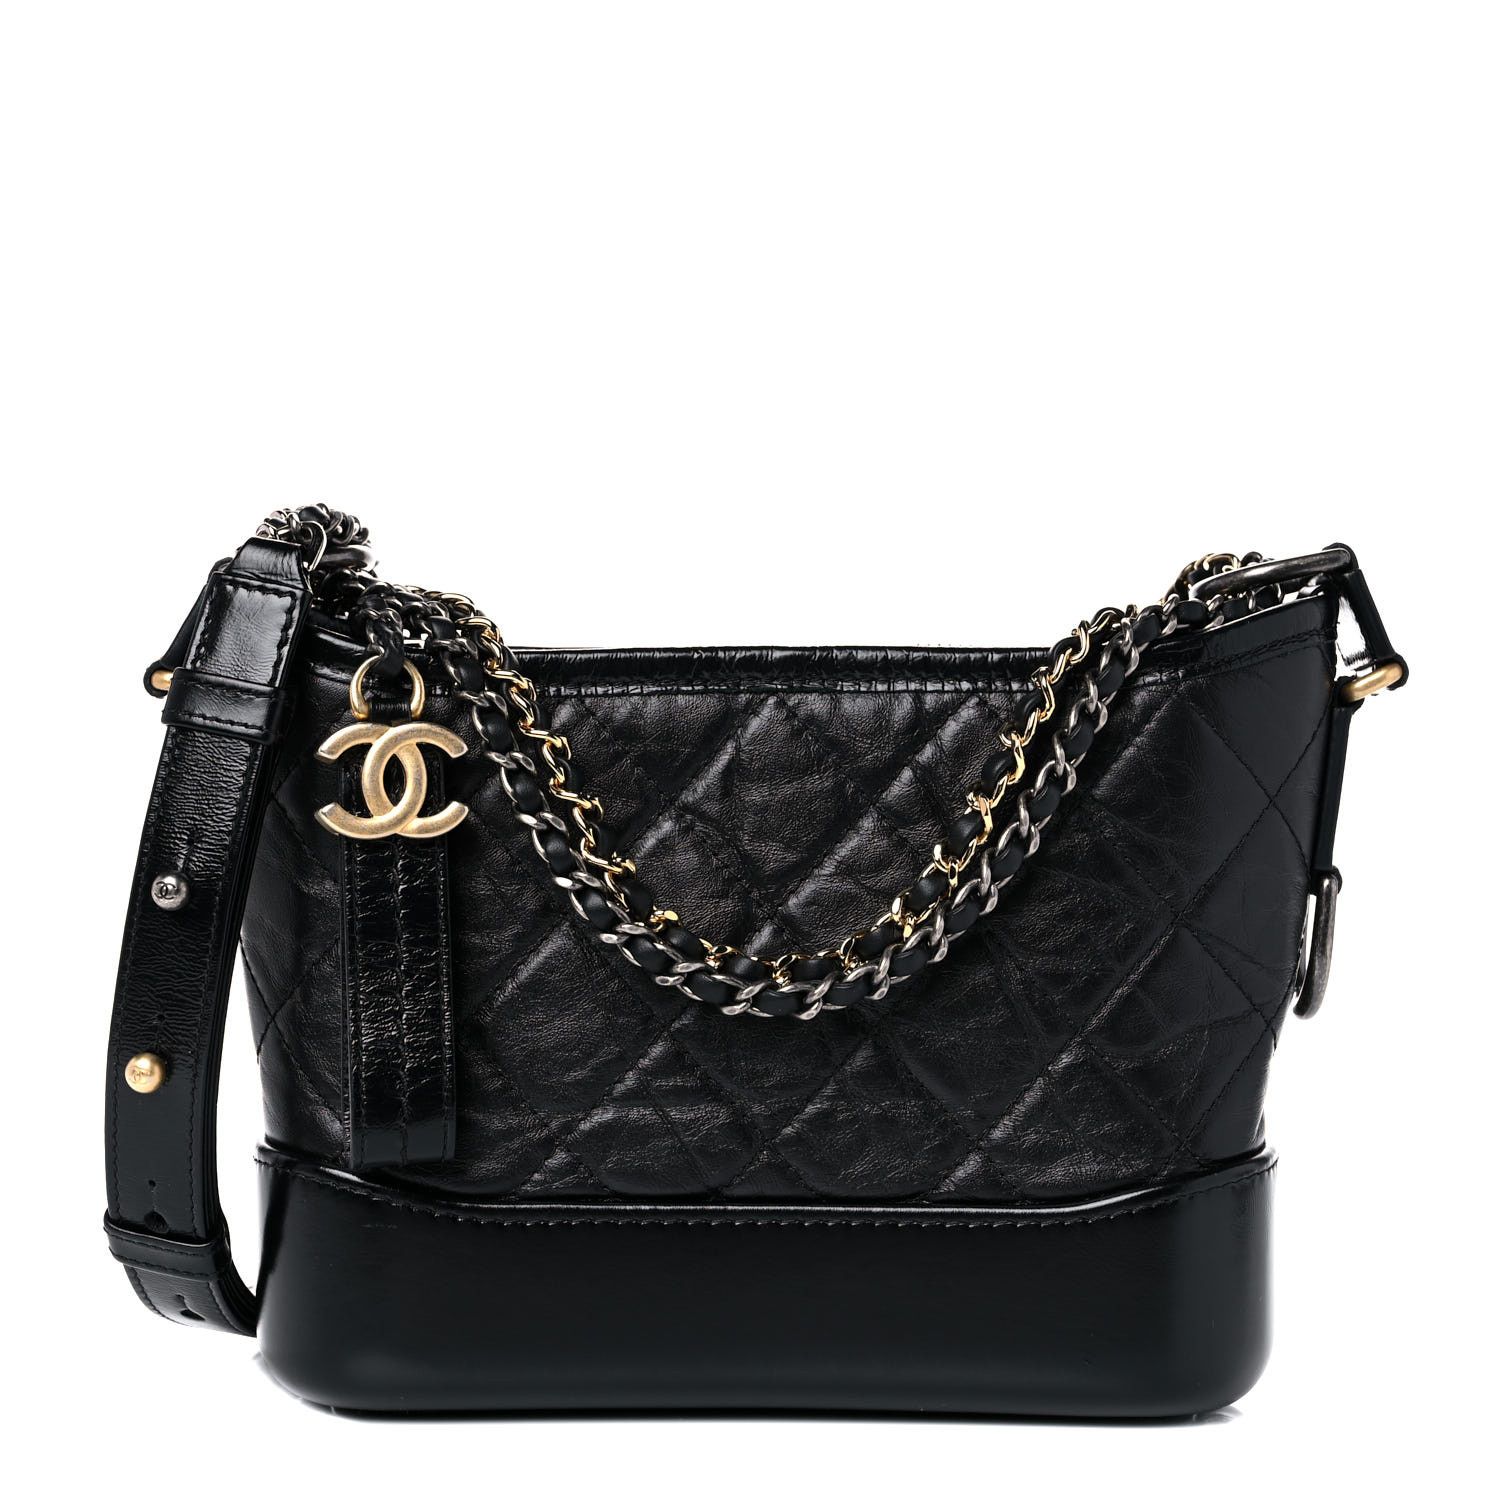 CHANEL Aged Calfskin Quilted Small Gabrielle Hobo Black | FASHIONPHILE | Fashionphile